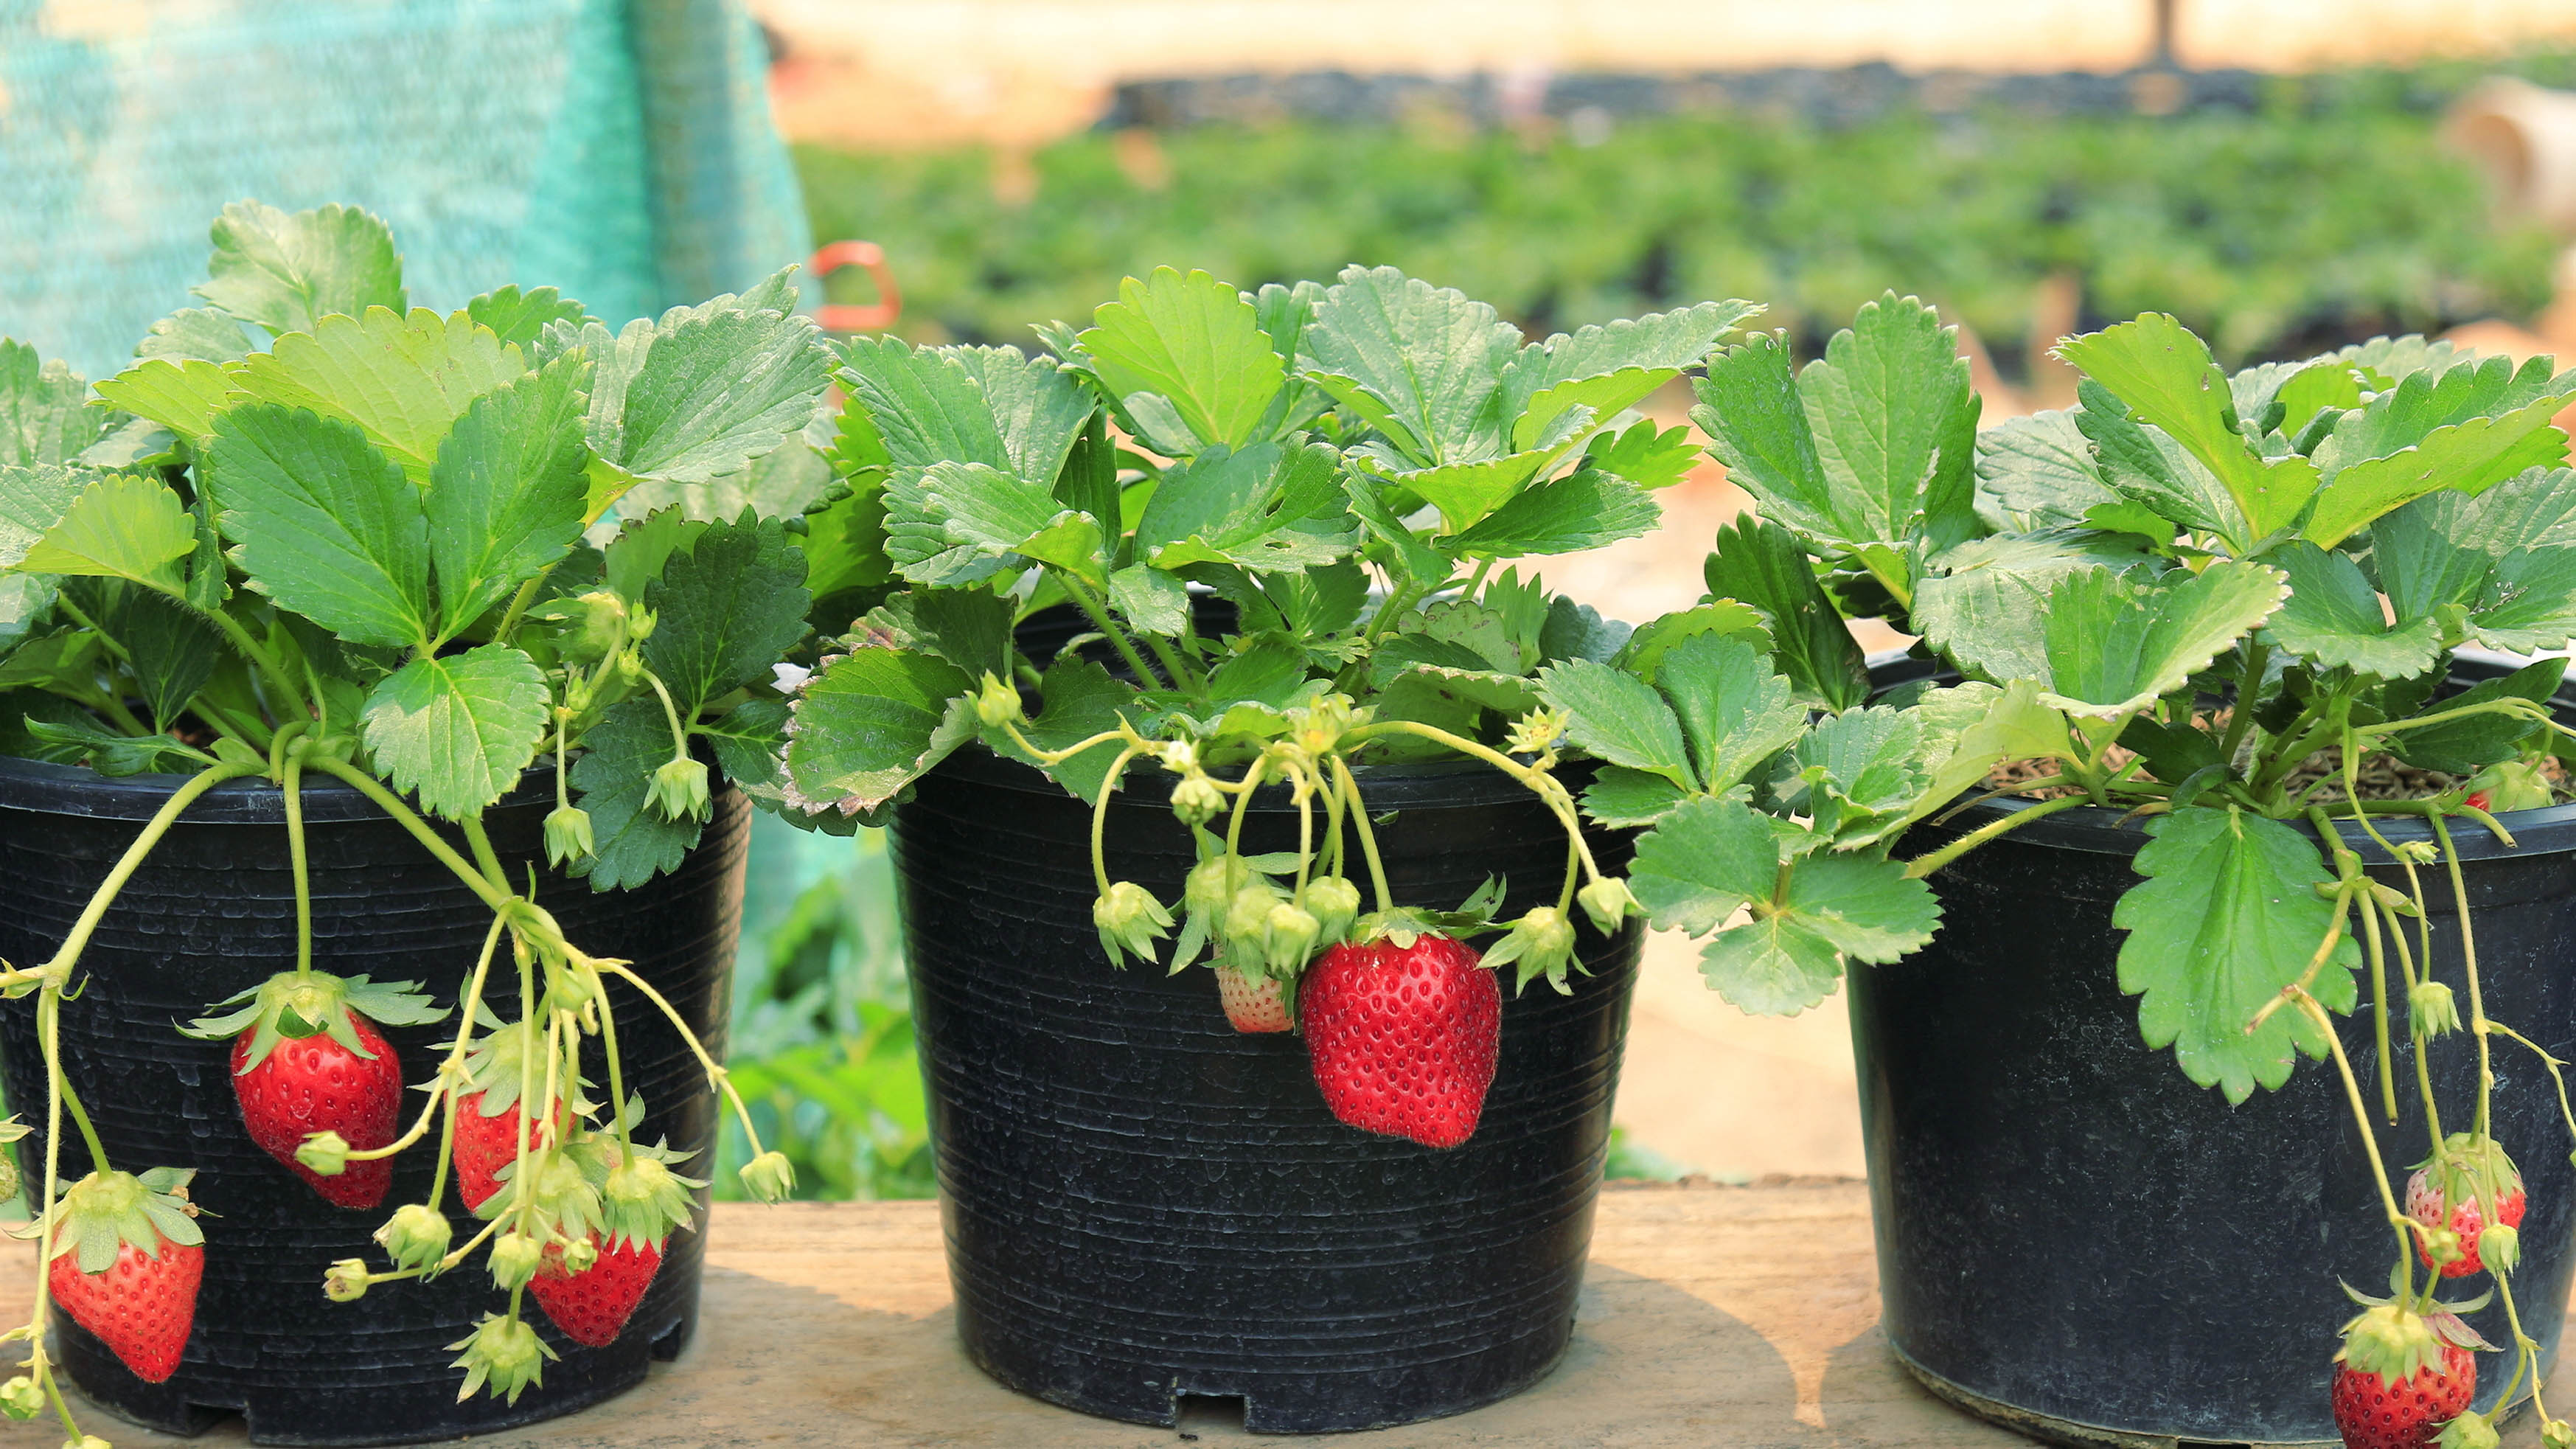 Three pots with strawberry plants on the table